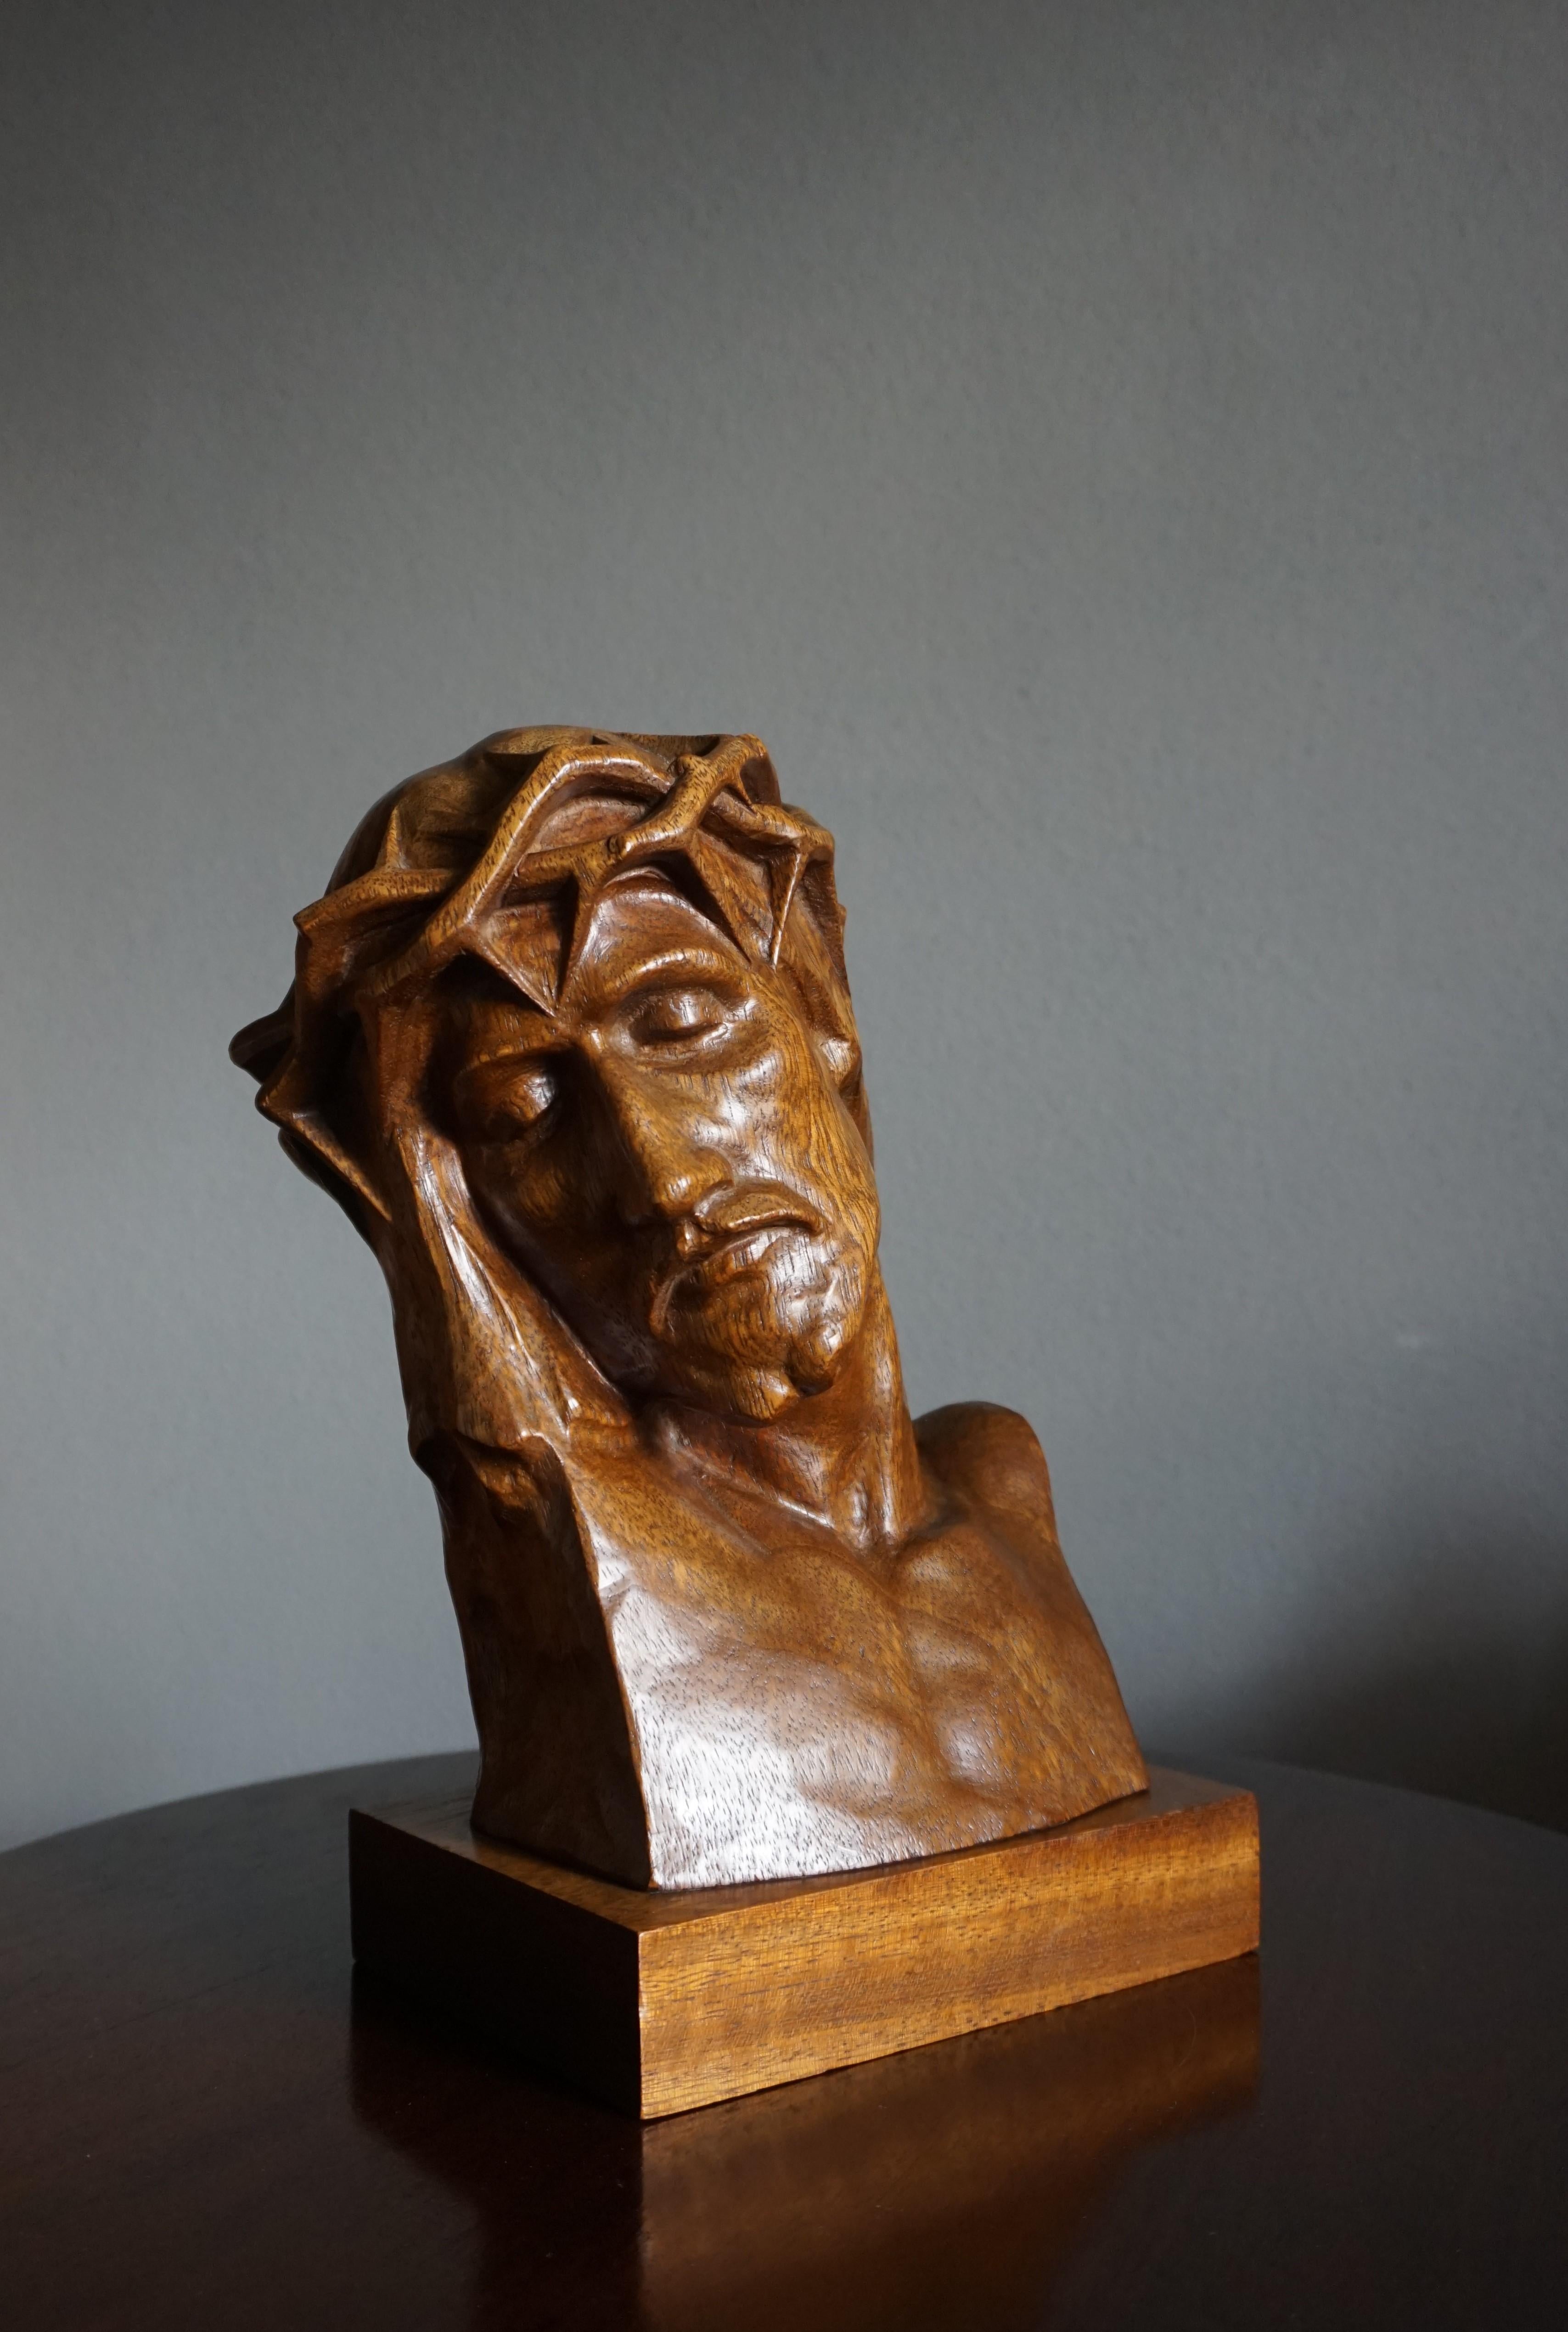 Top quality and mint condition sculpture from the Art Deco era.

This incredibly well carved bust is like a fragment of the entire corpus of Christ in his final hours on the cross. French master sculptor/artist Louis Sosson (active 1905-1930) could